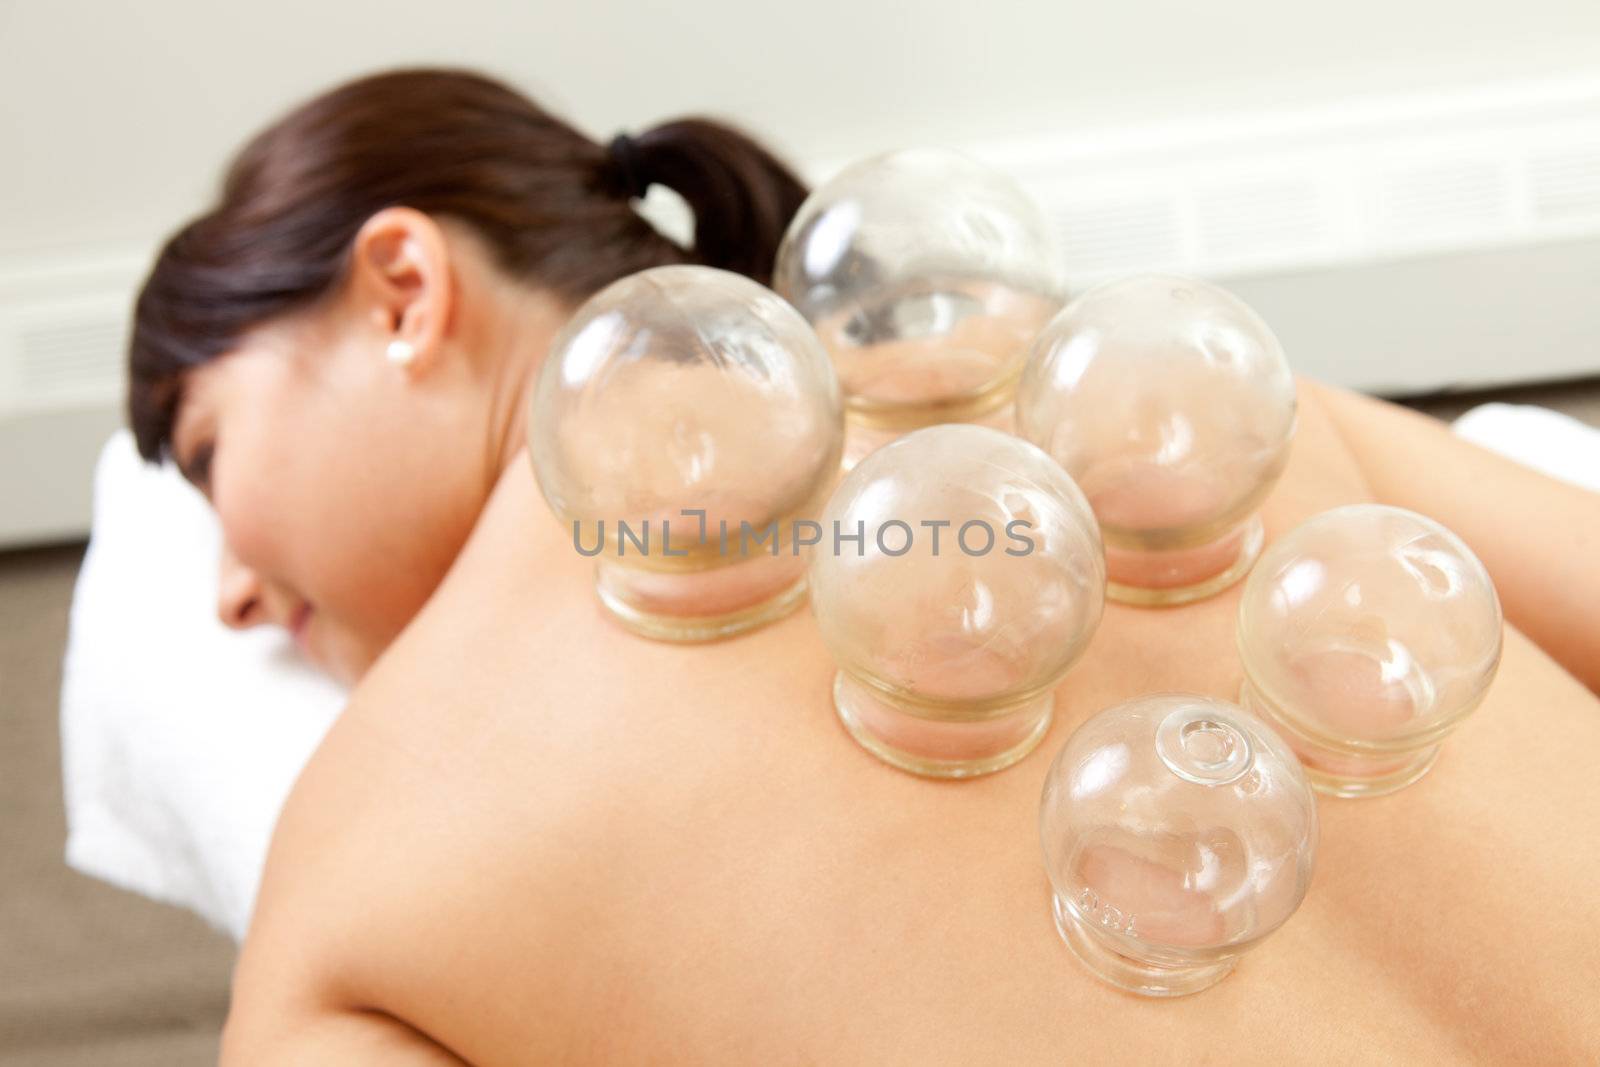 Acupuncture Fire cupping detail on woman's back